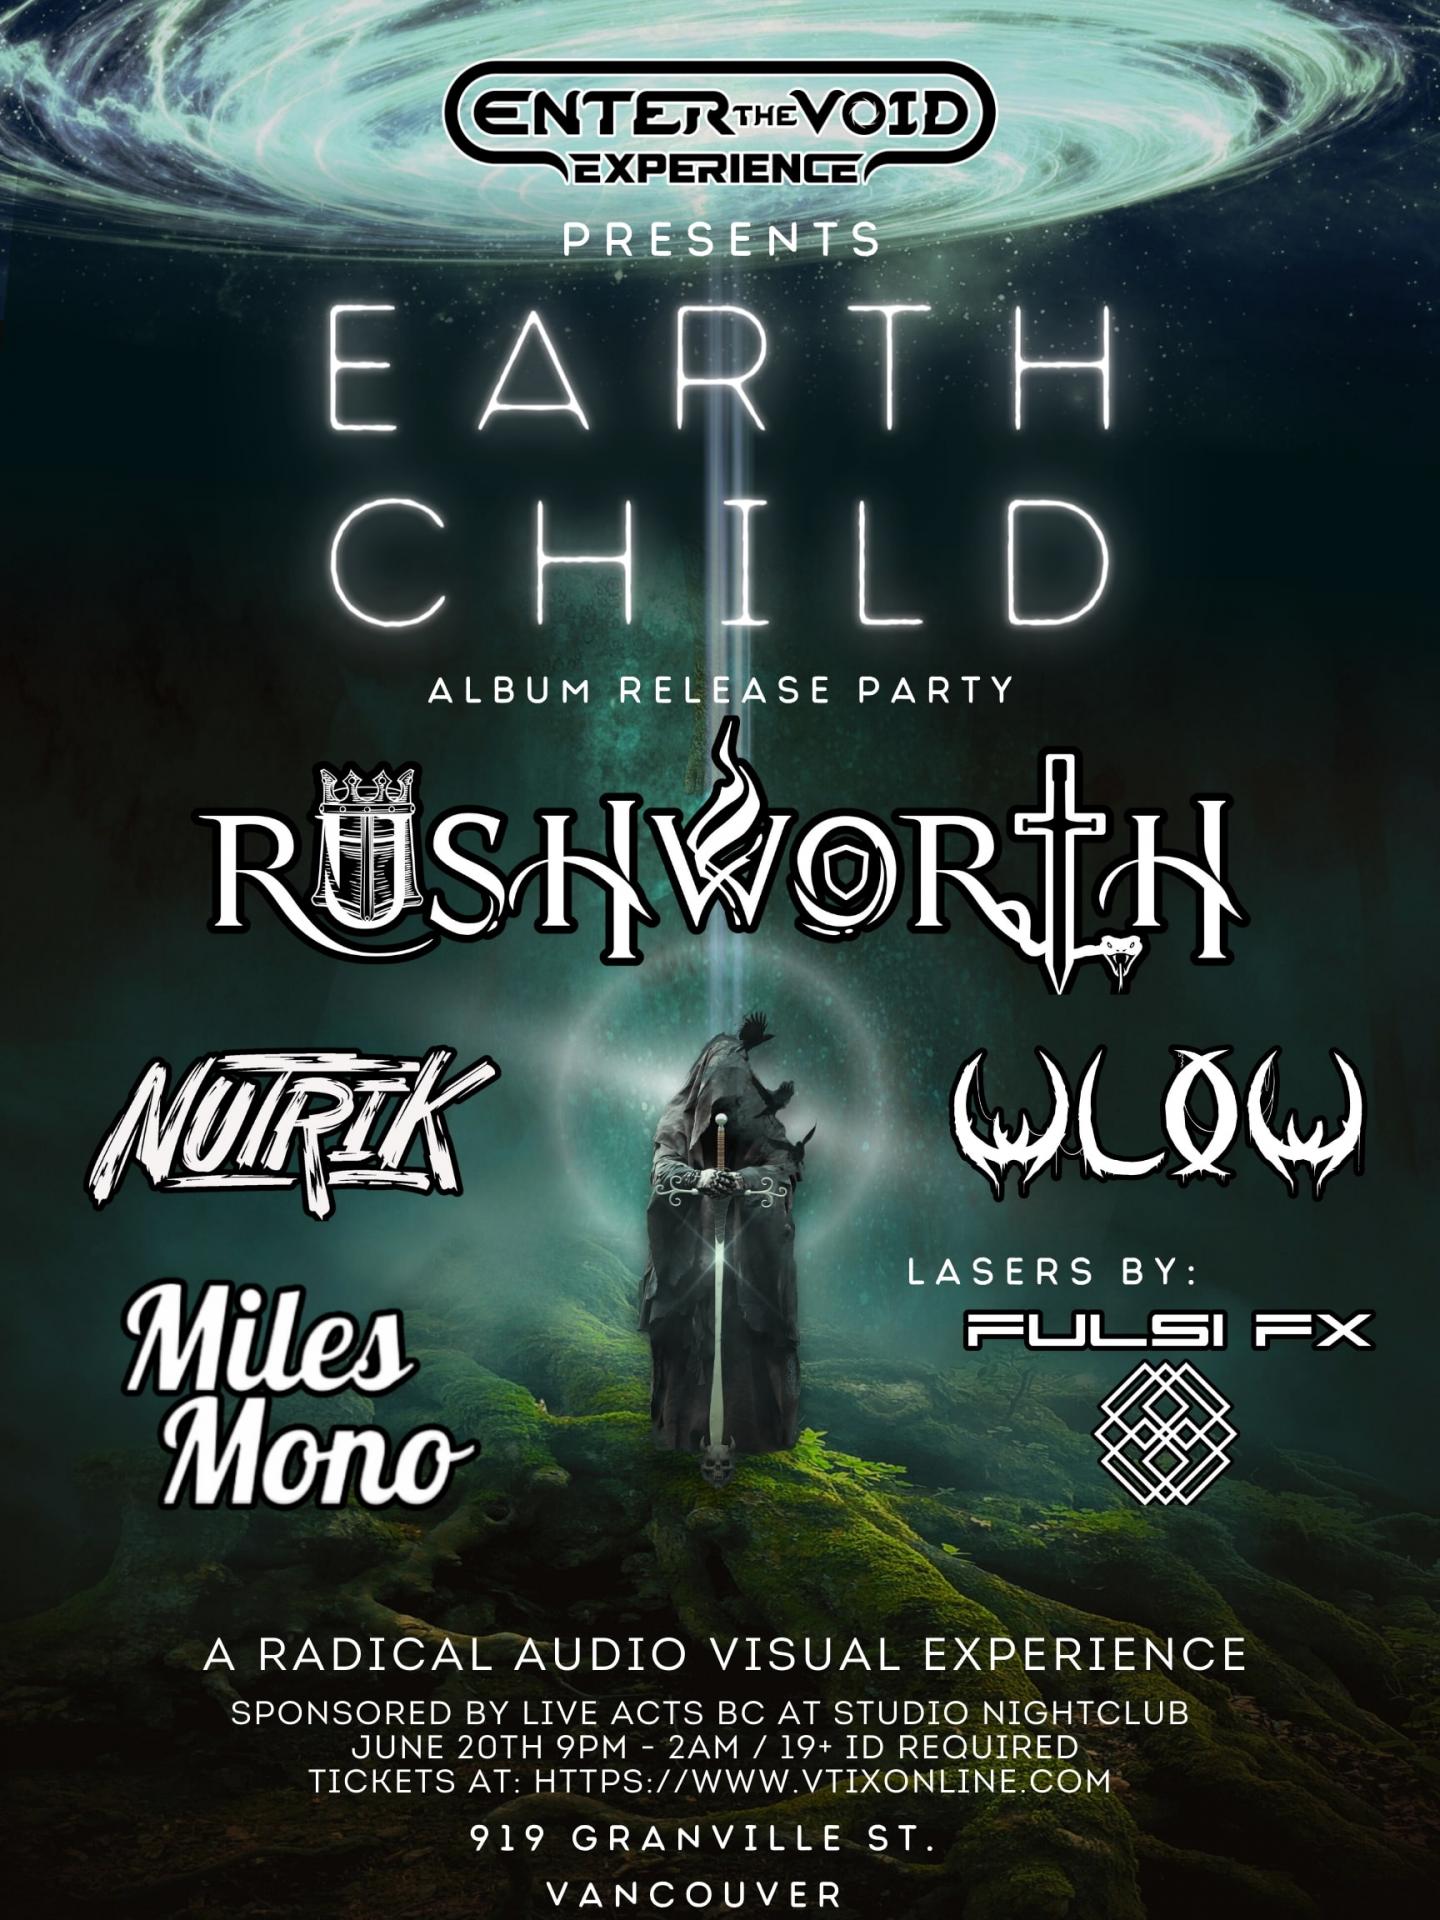 Enter the Void Experience presents Earth Child - Album Release Party